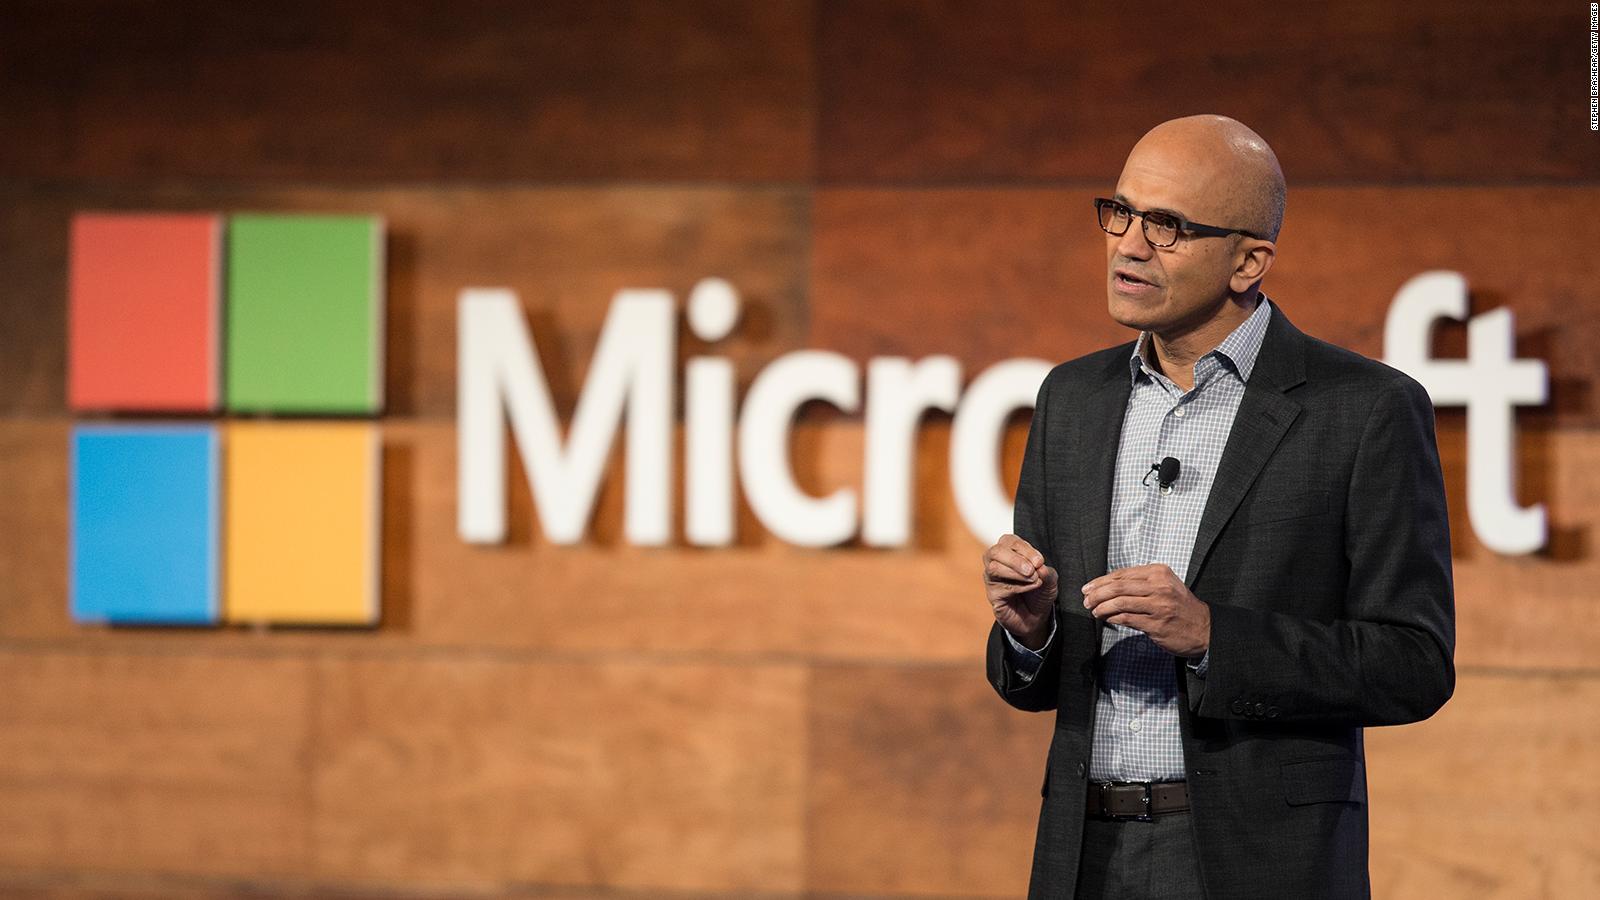 Microsoft CEO shares leadership lessons he's learned during the pandemic